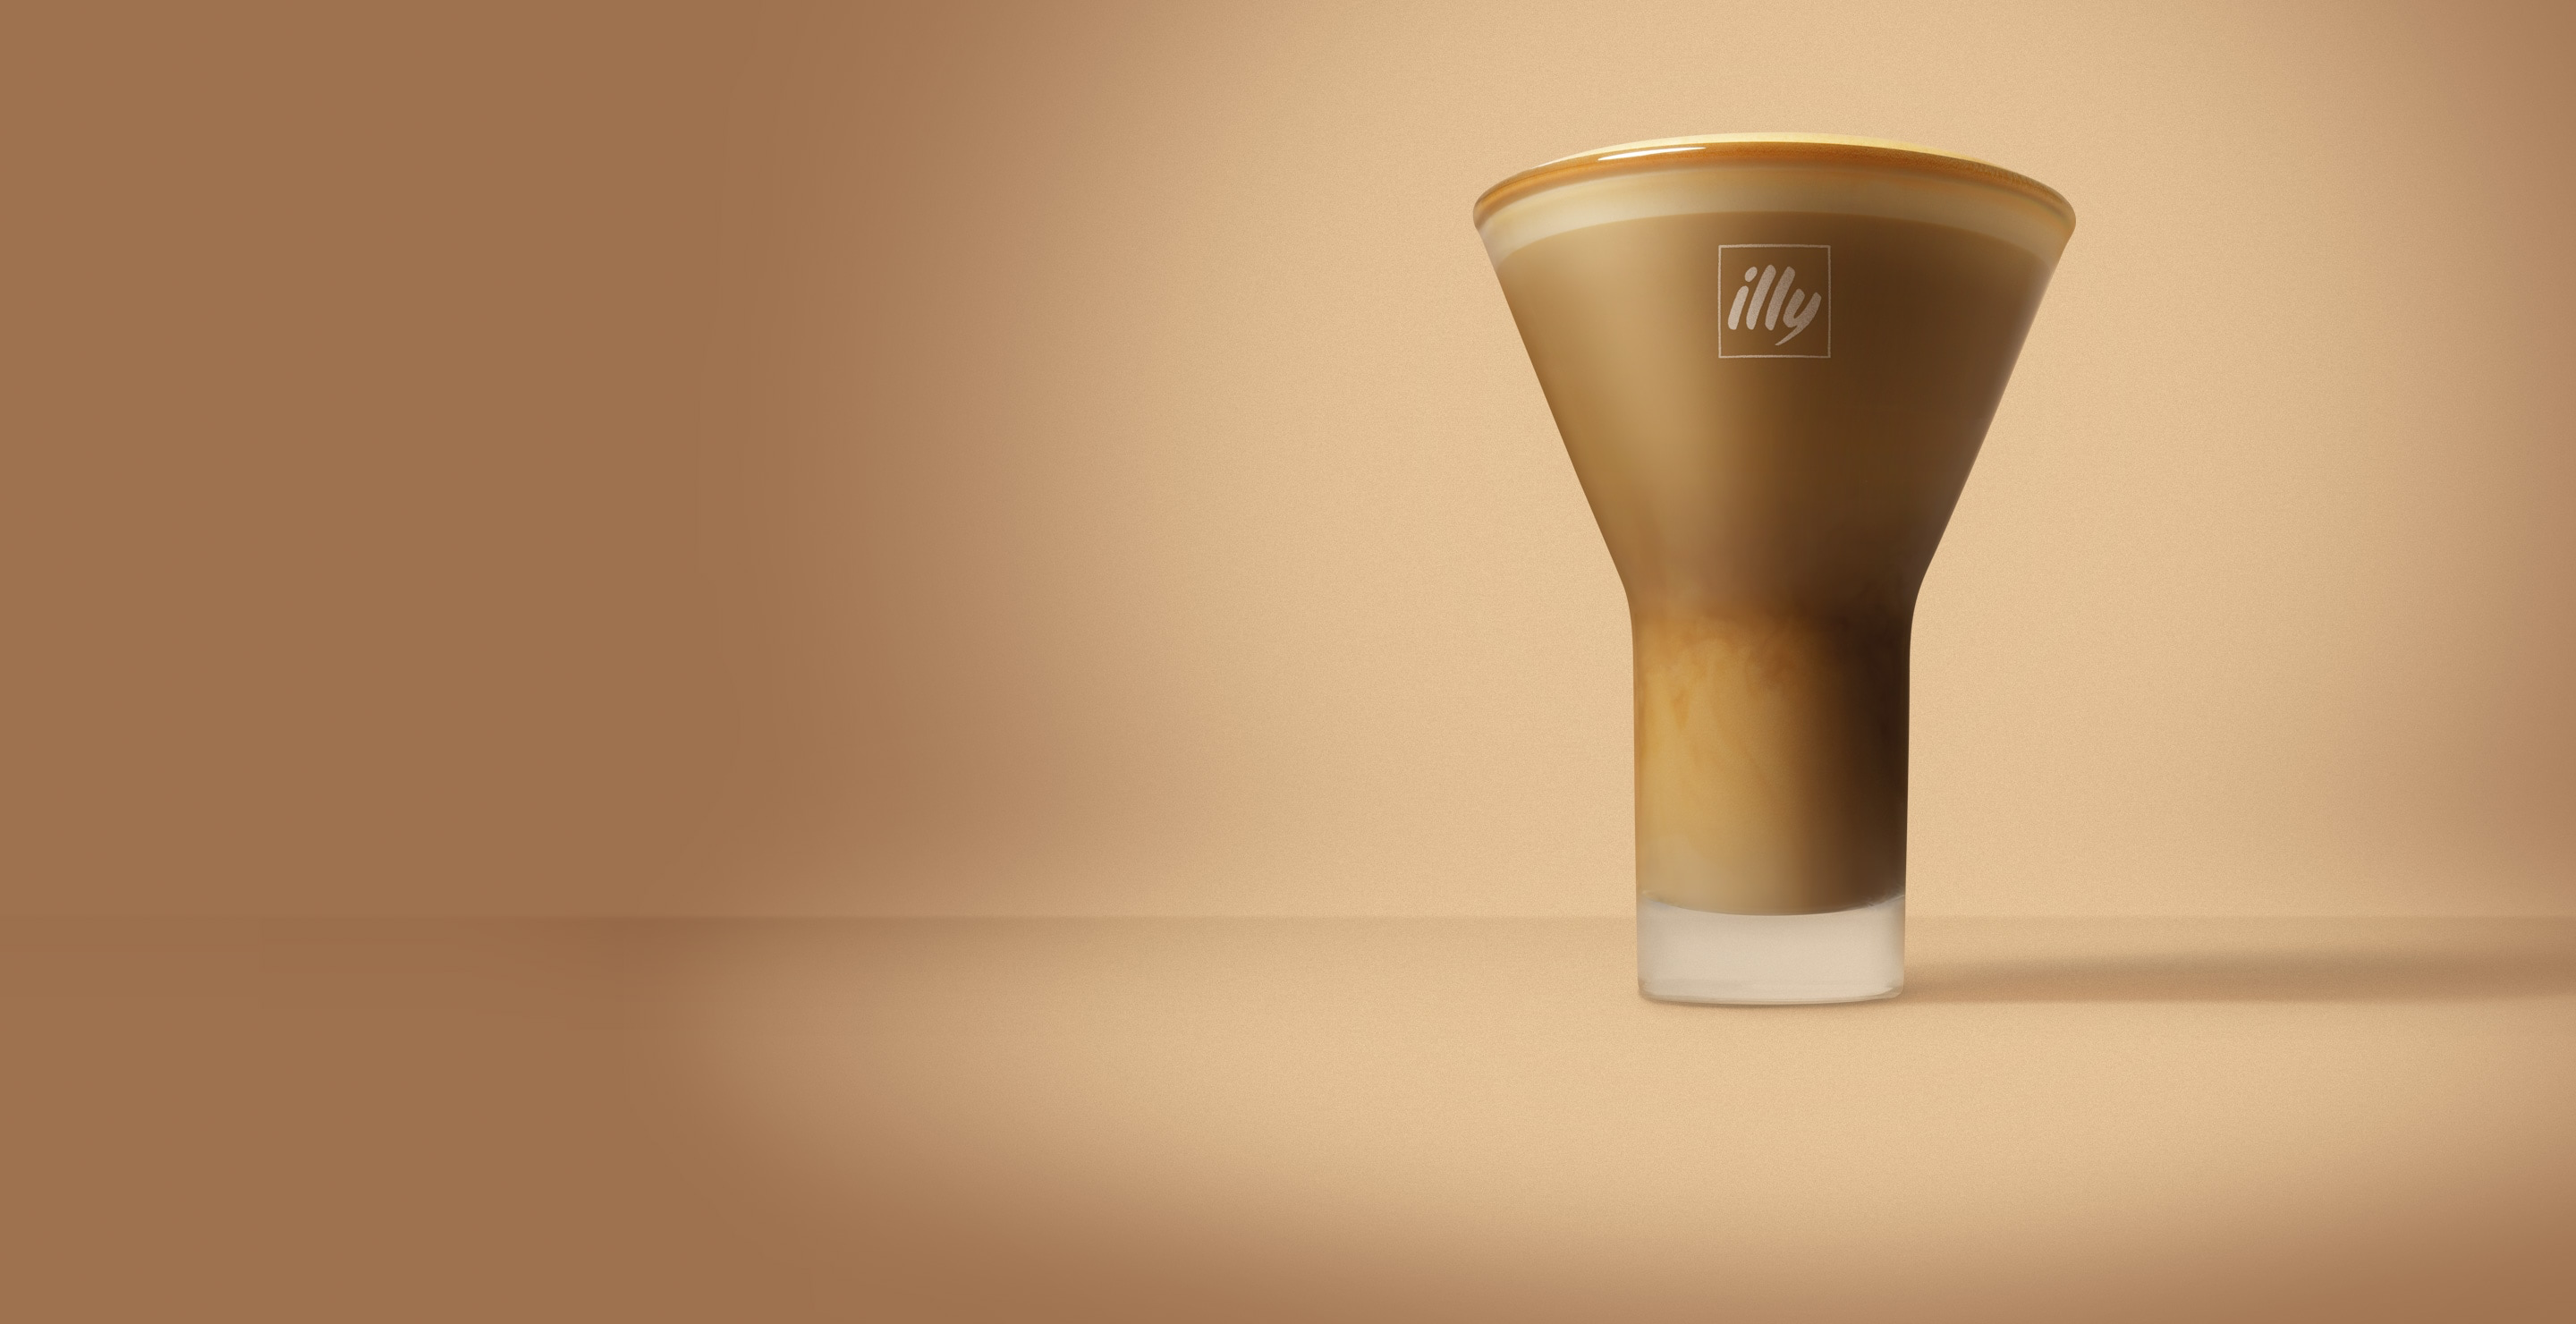 illy Malaysia Brew at Home caffe latte recipe blog